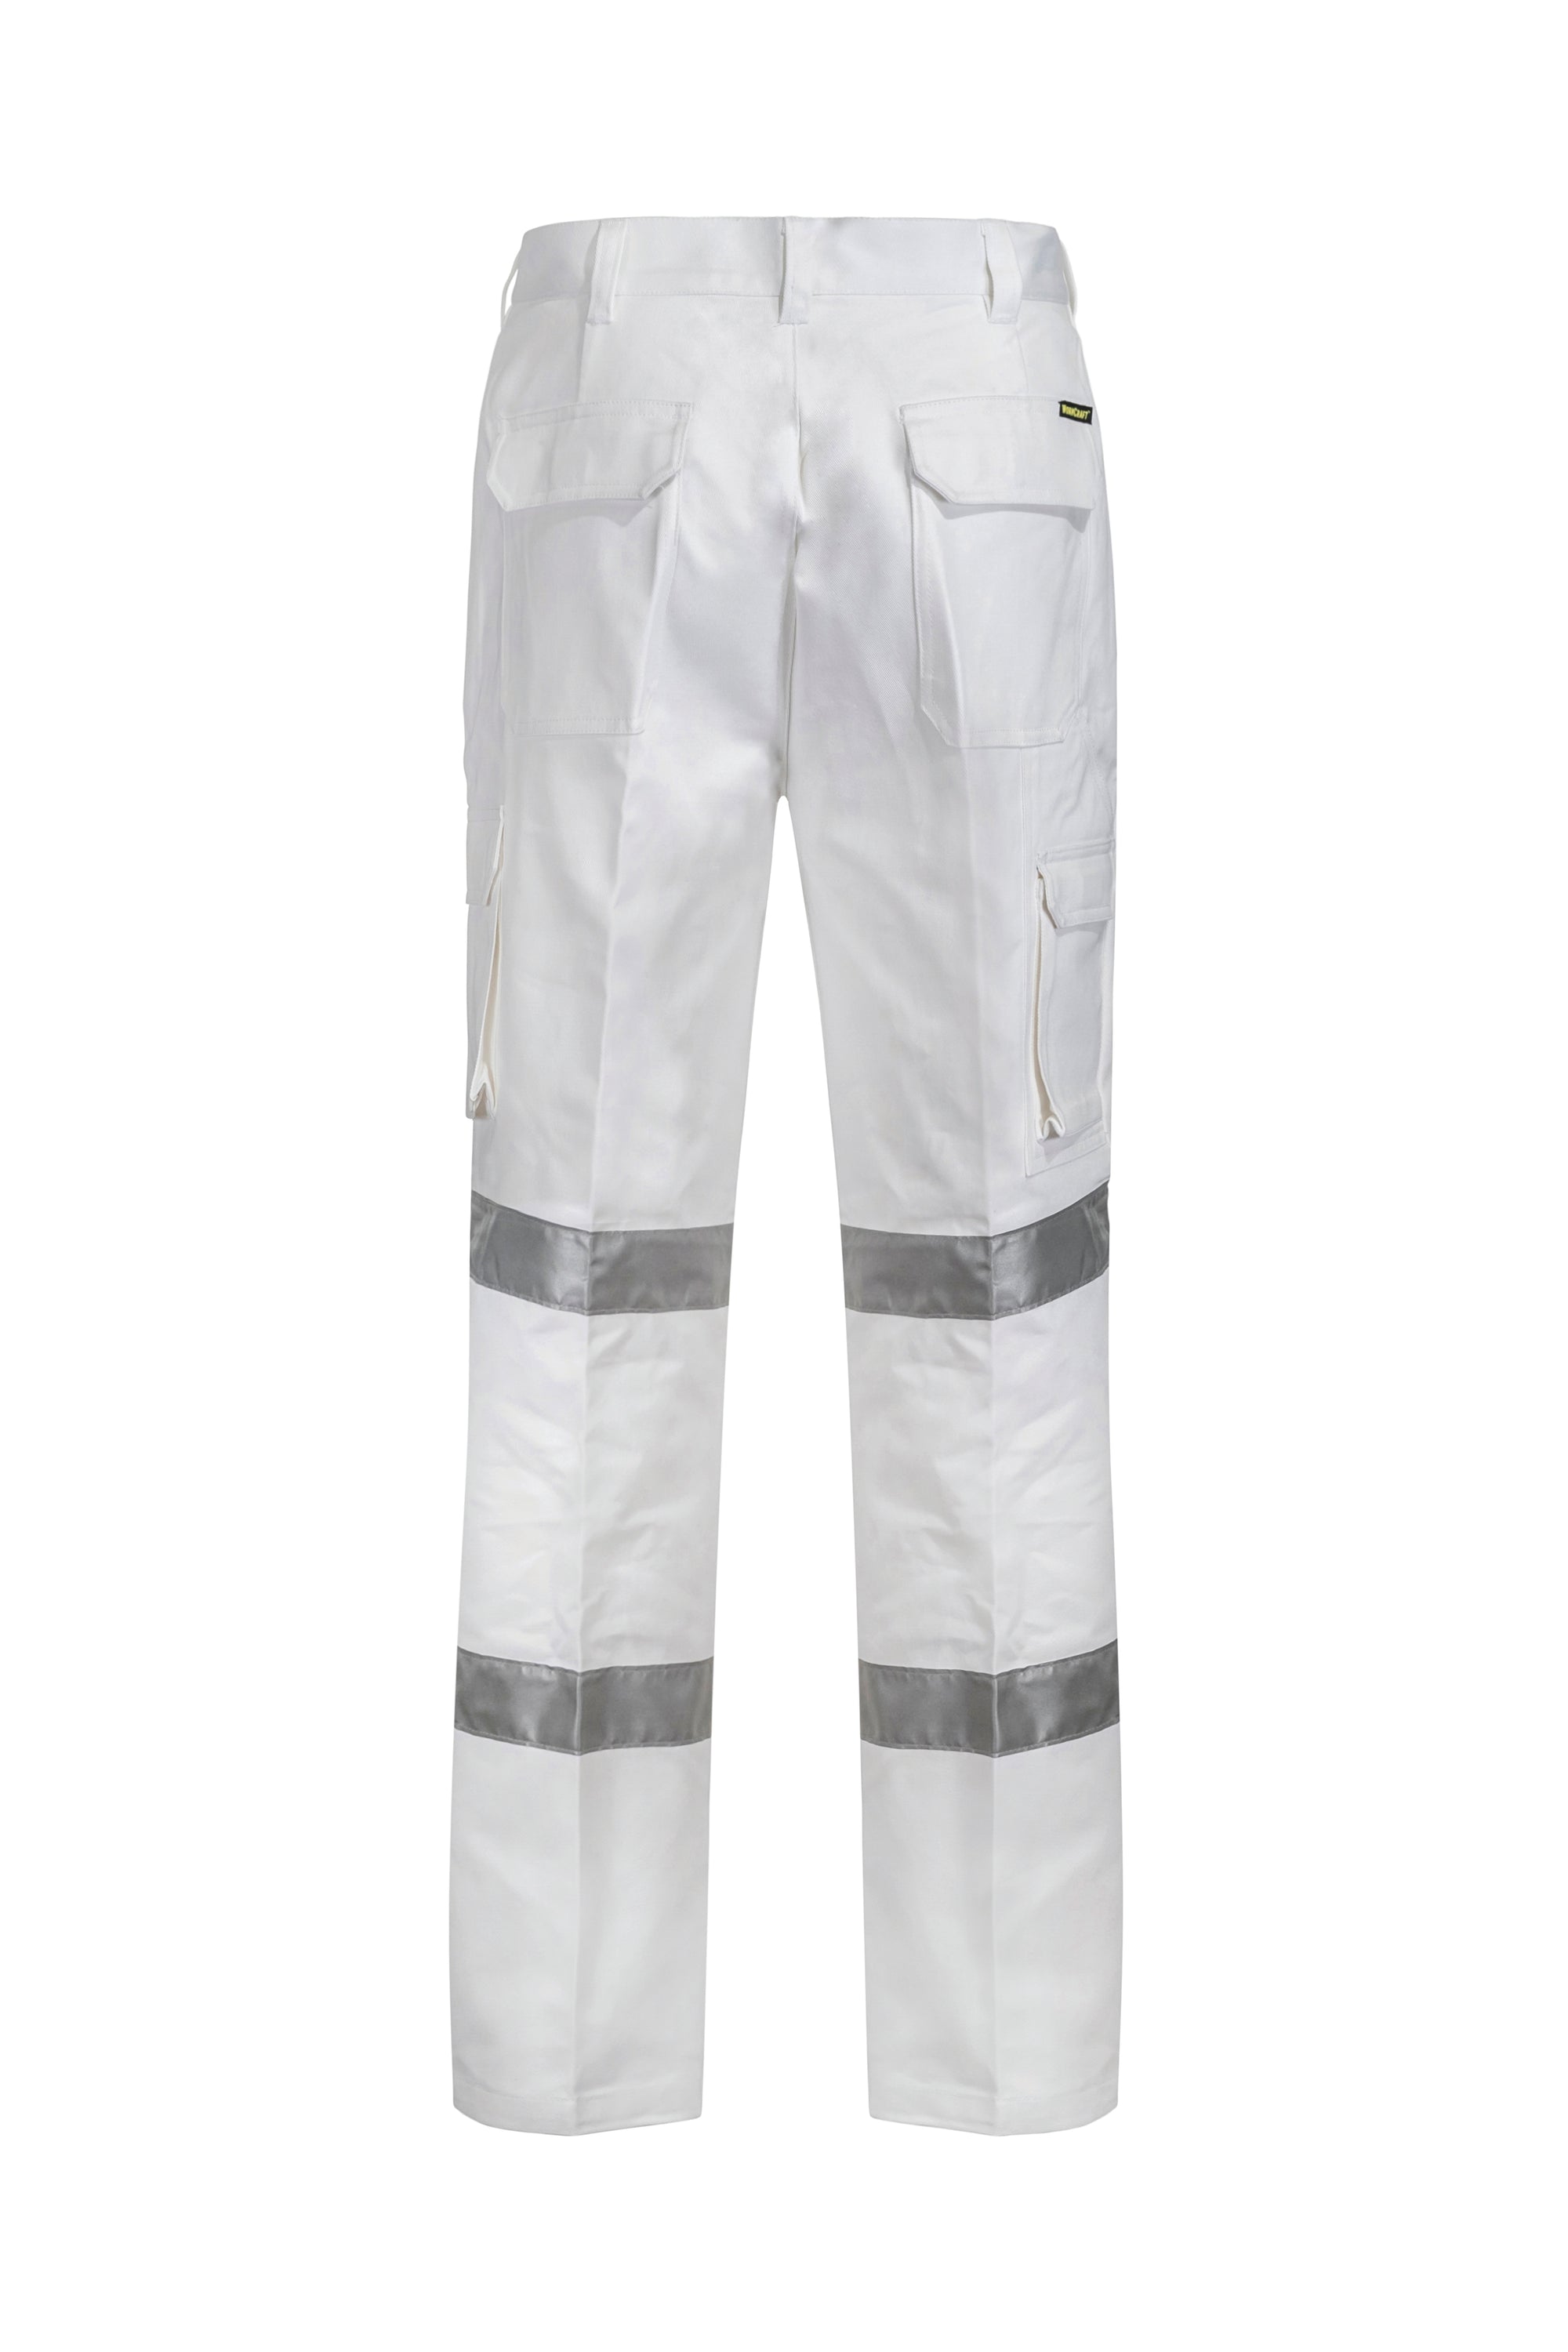 WorkCraft Mens White bm-Taped Roadworkers Cargo Pants 310g 102R